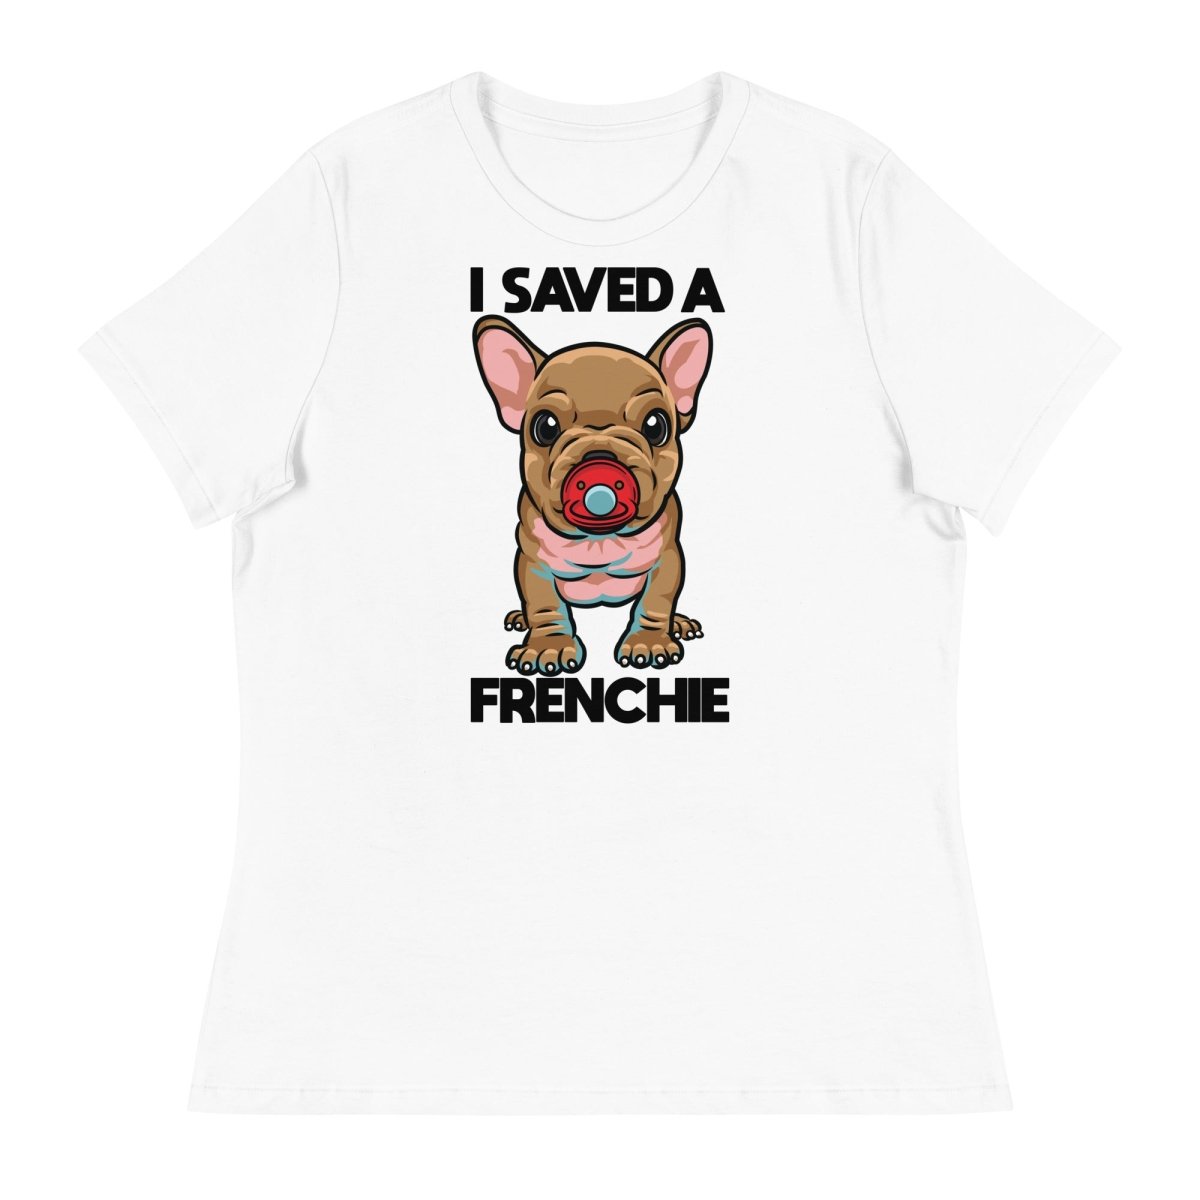 I Saved A Frenchie Women's Relaxed Tee - French Bulldog Store